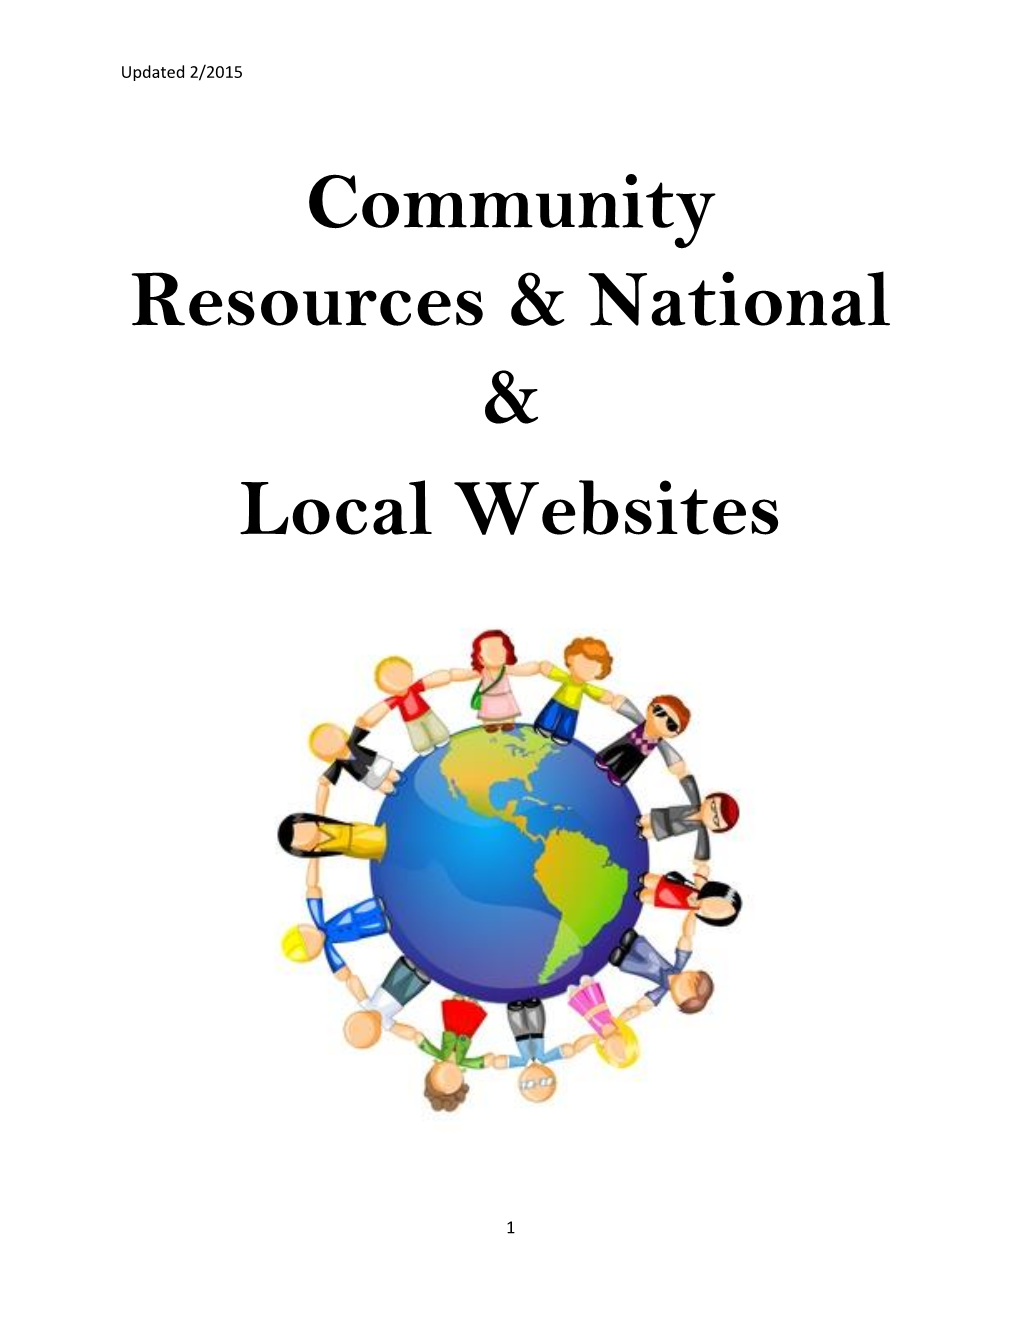 Community Resources & National & Local Websites